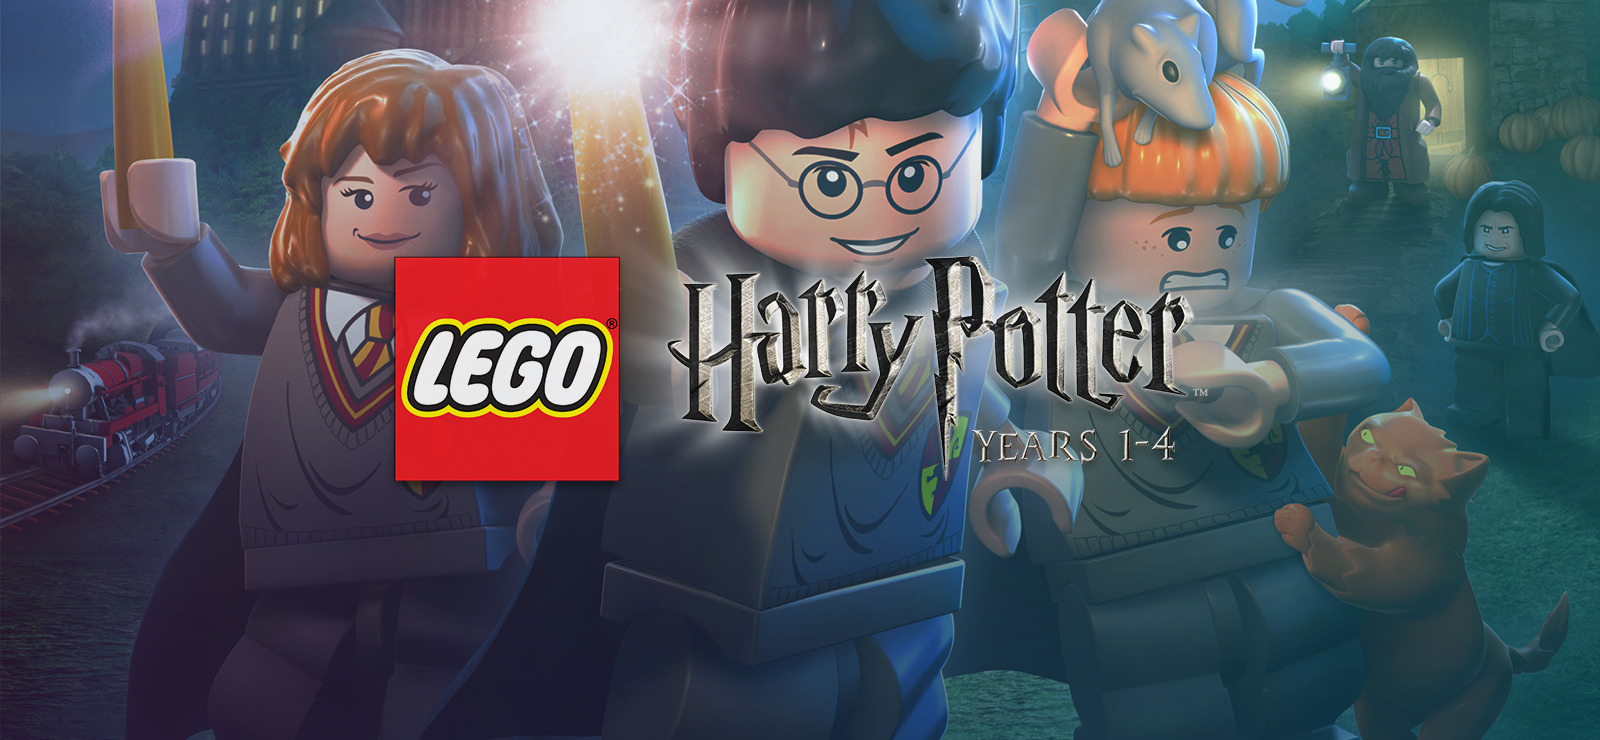 Lego Harry Potter years 1-4 : All Characters (view) - 100% Complete 